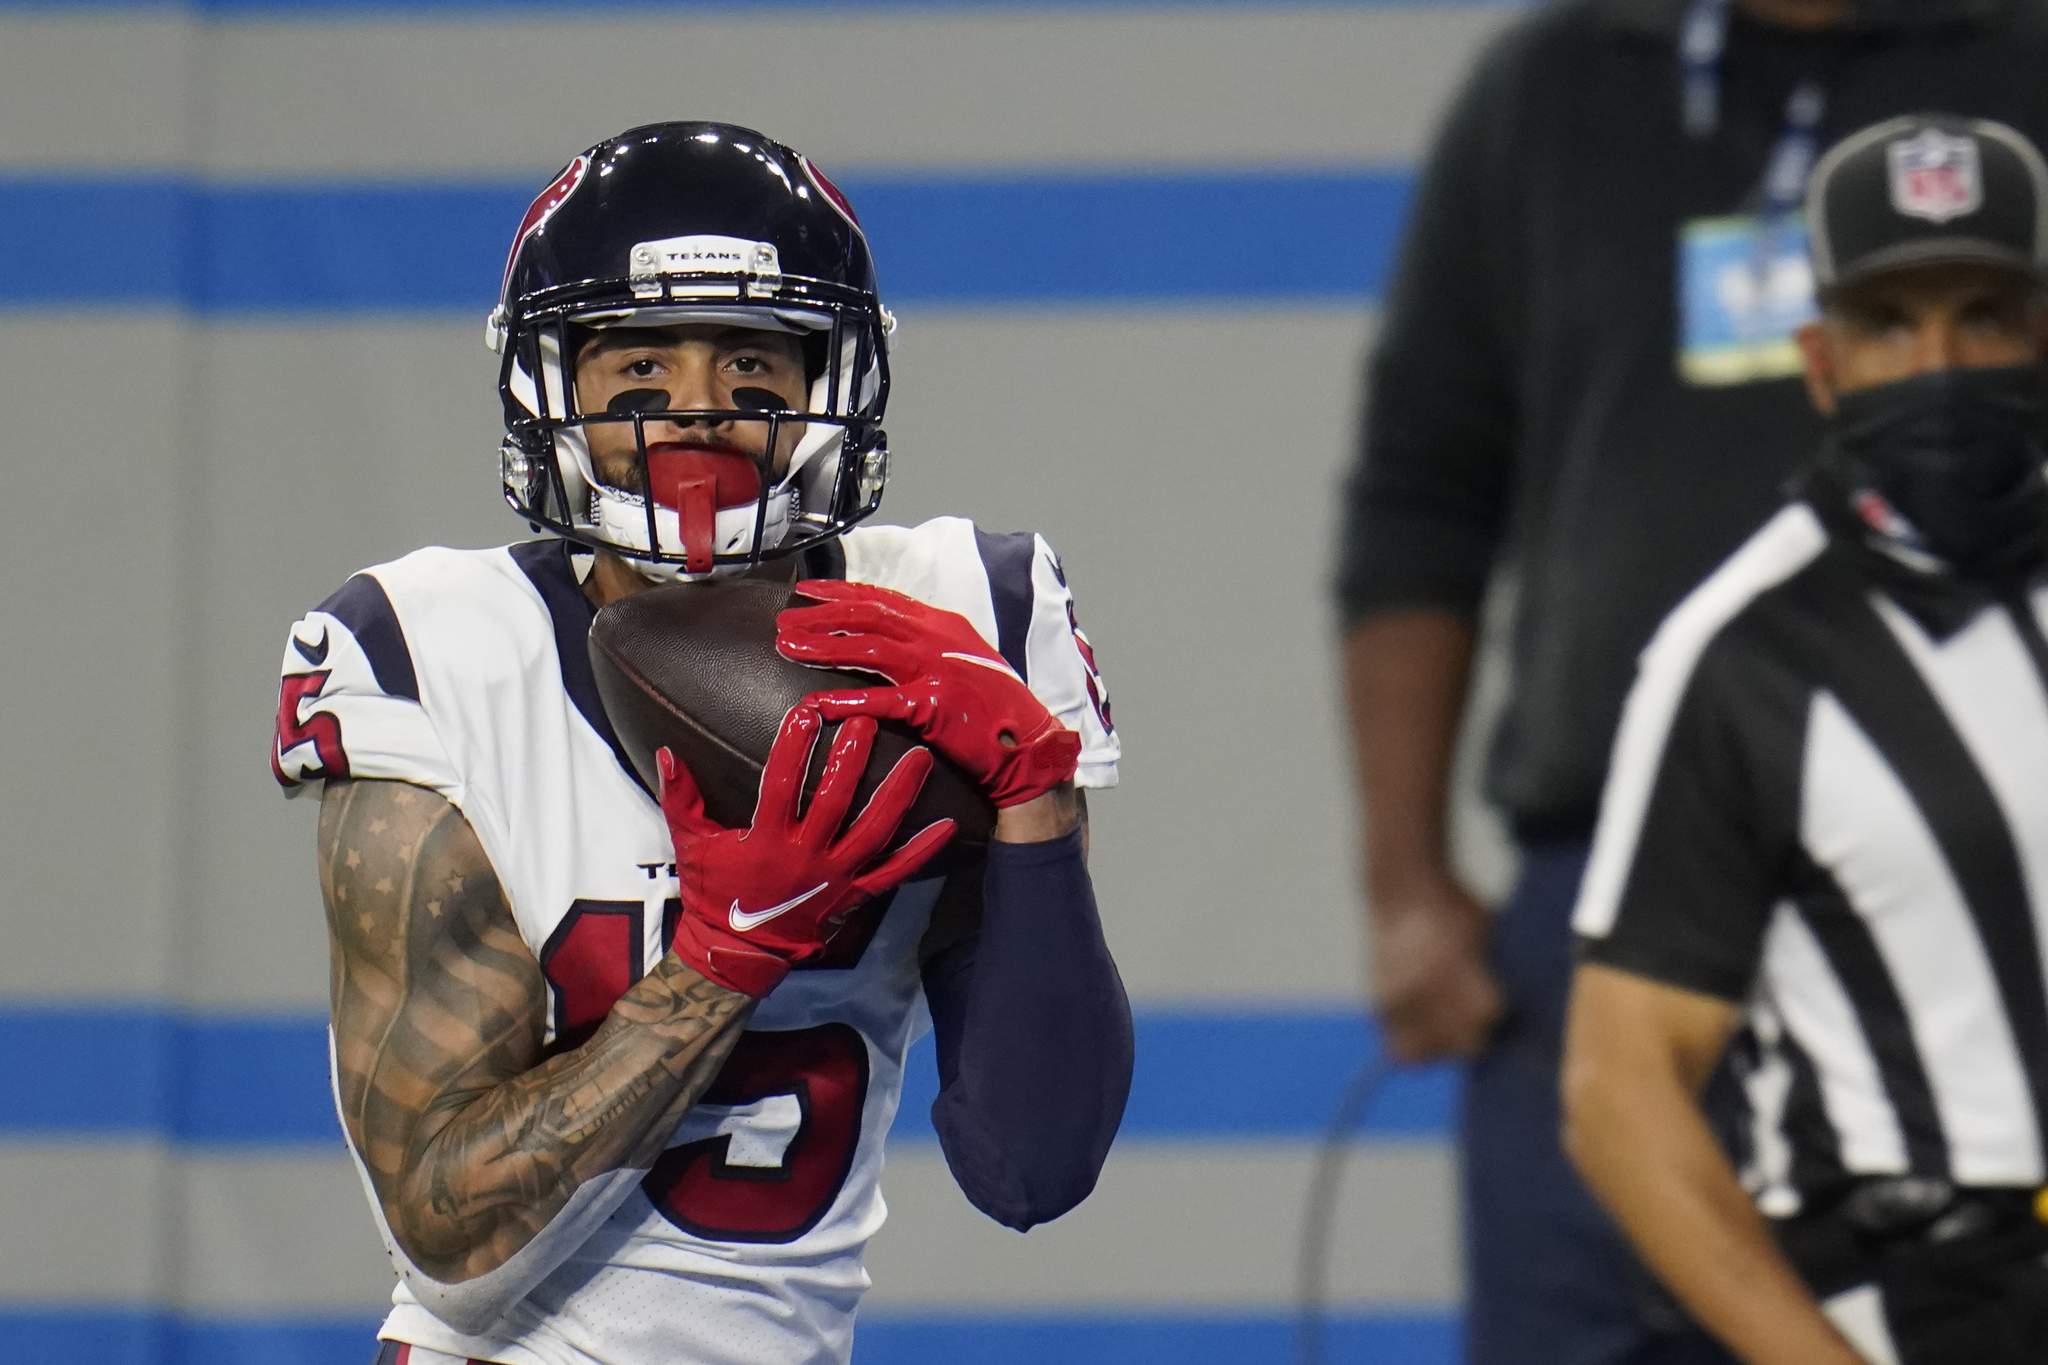 Reports: Dolphins sign WR Will Fuller to a one-year deal